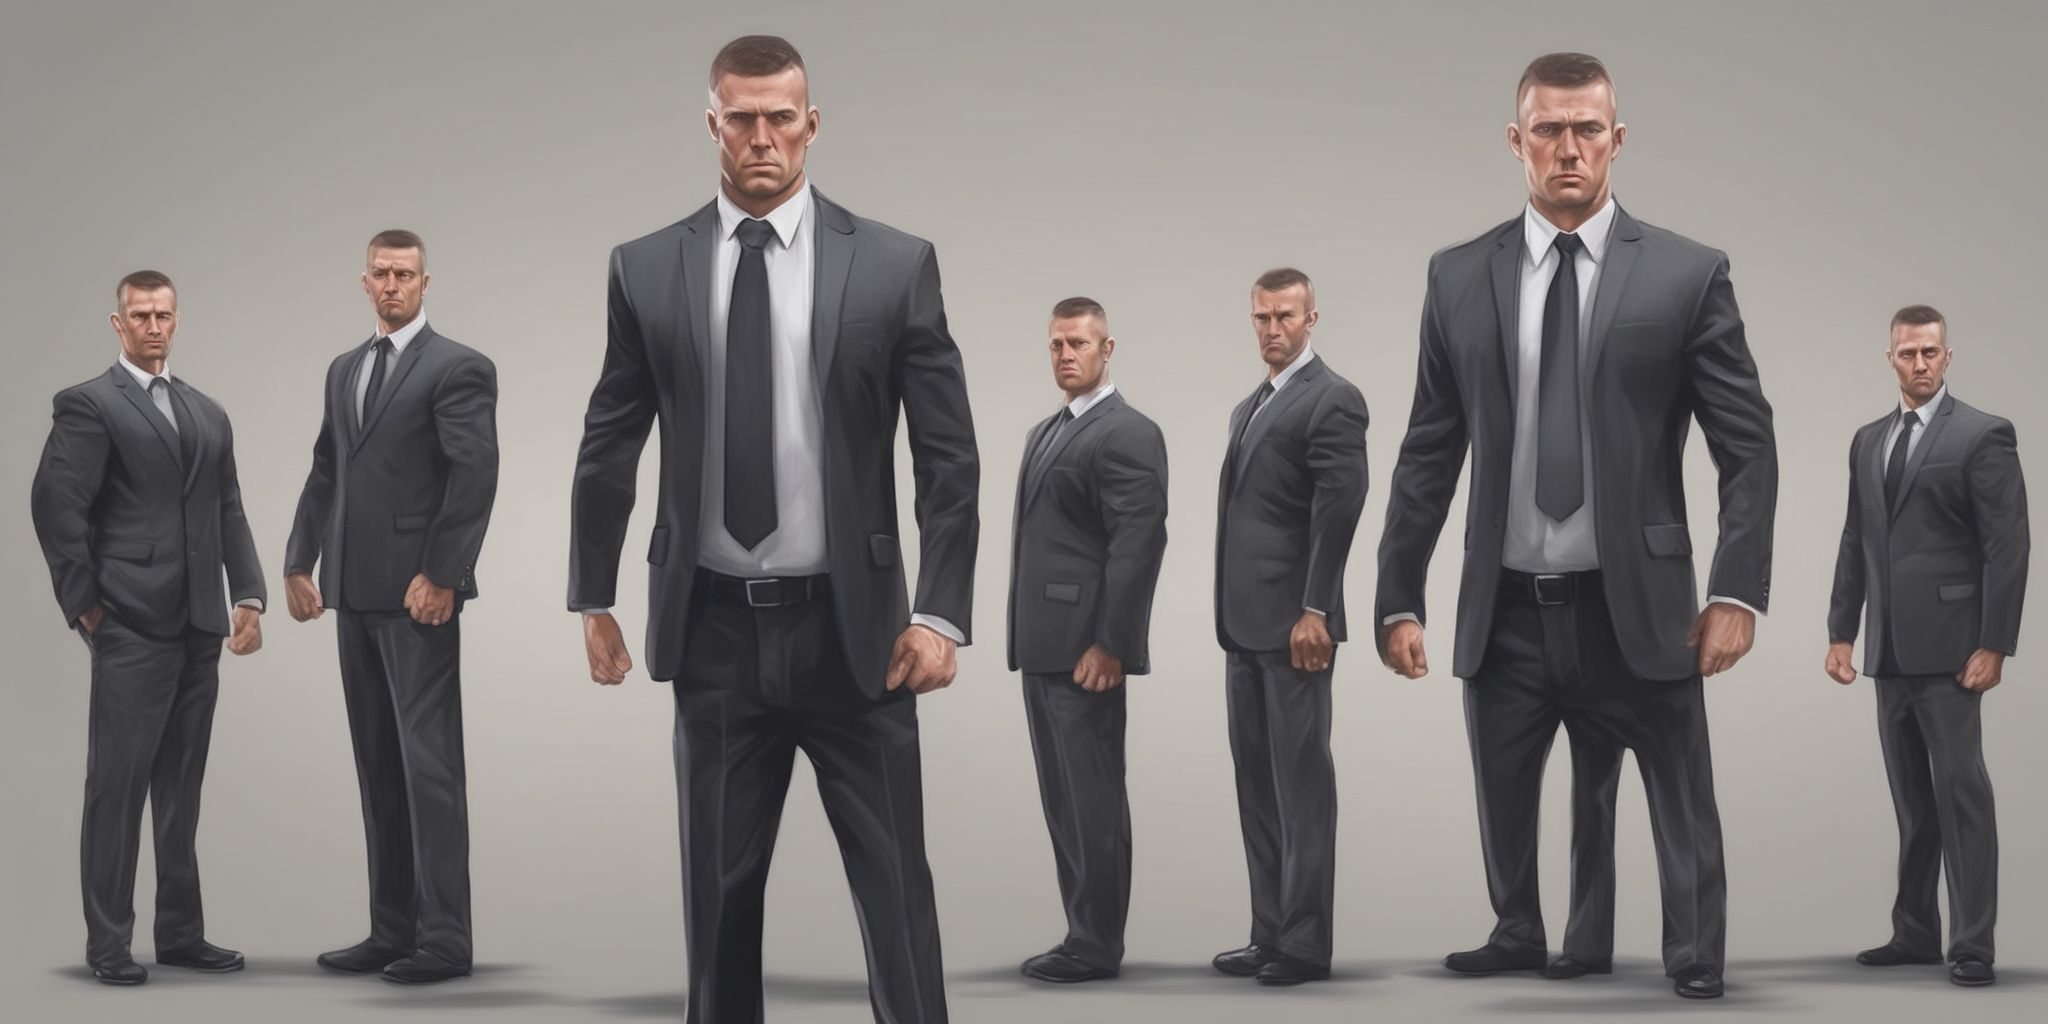 Bodyguard  in realistic, photographic style